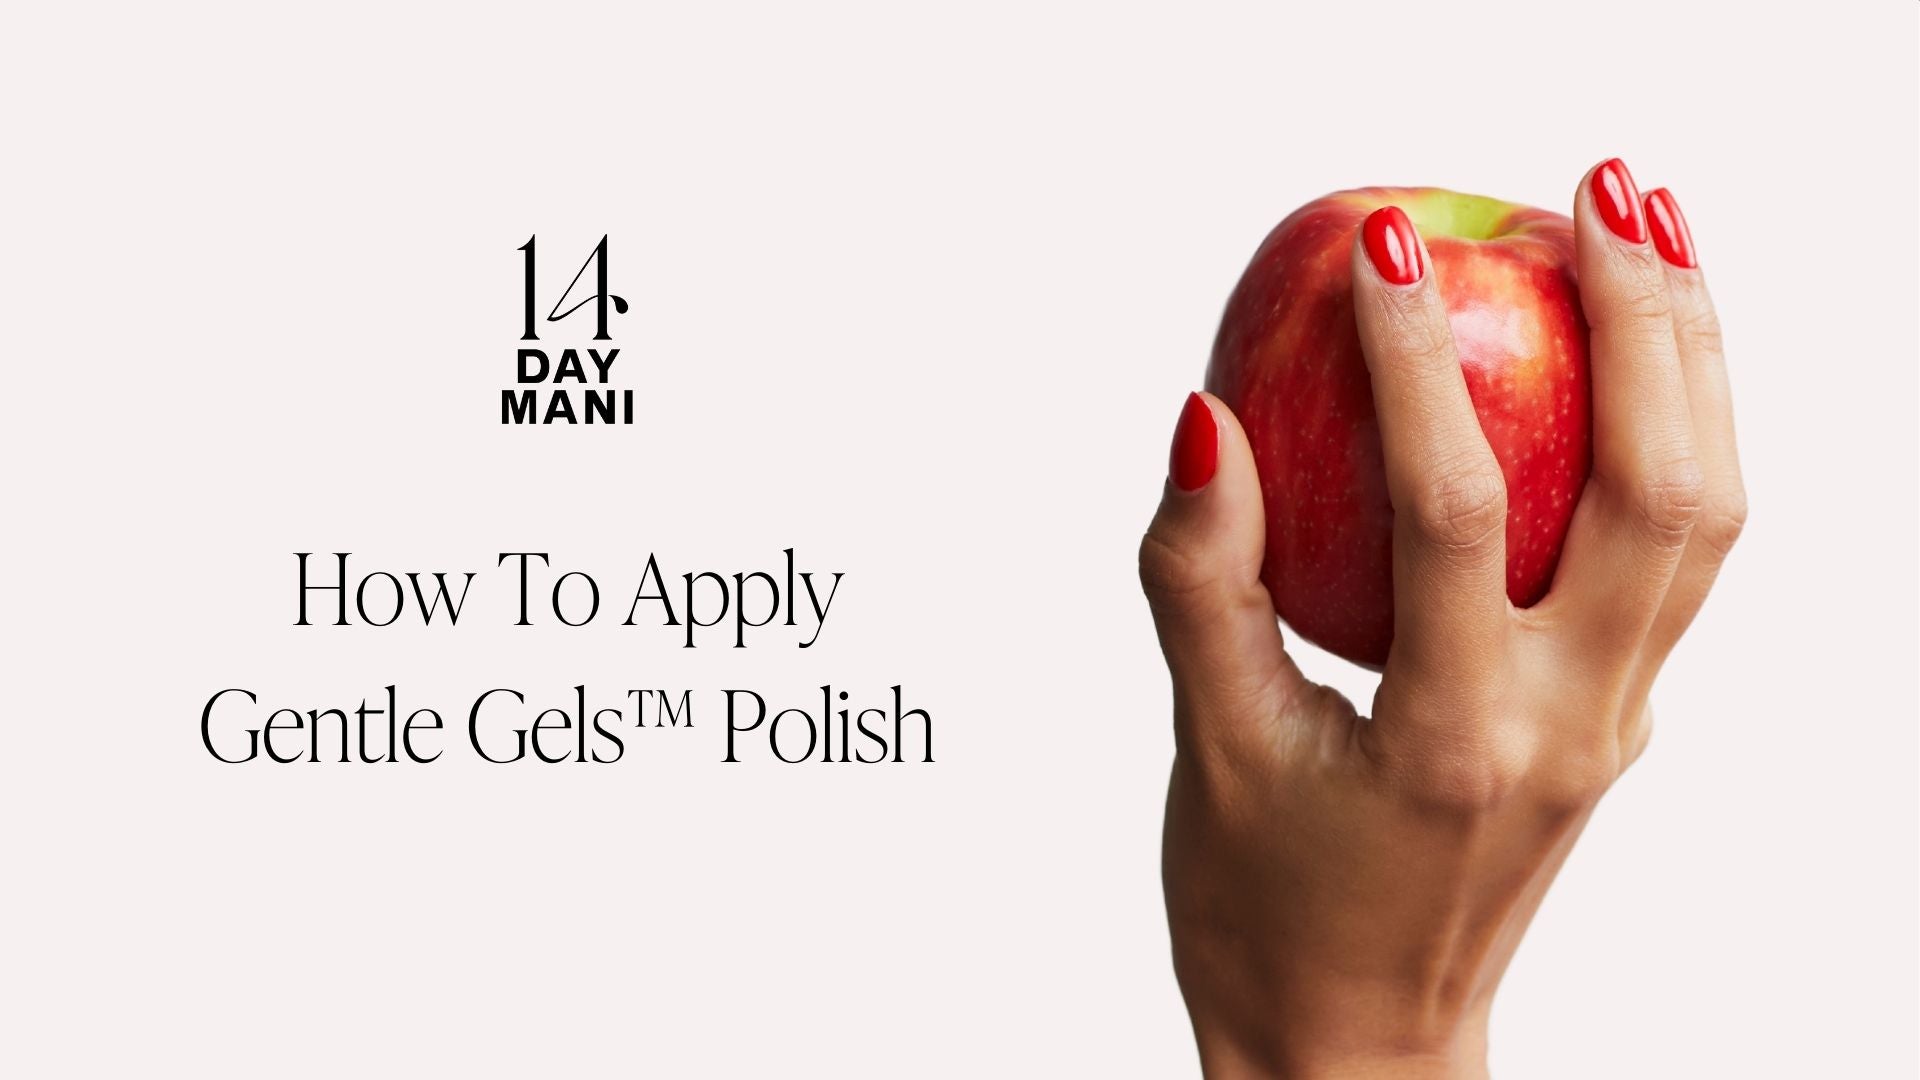 Load video: HOW TO APPLY GENTLE GELS™ POLISH